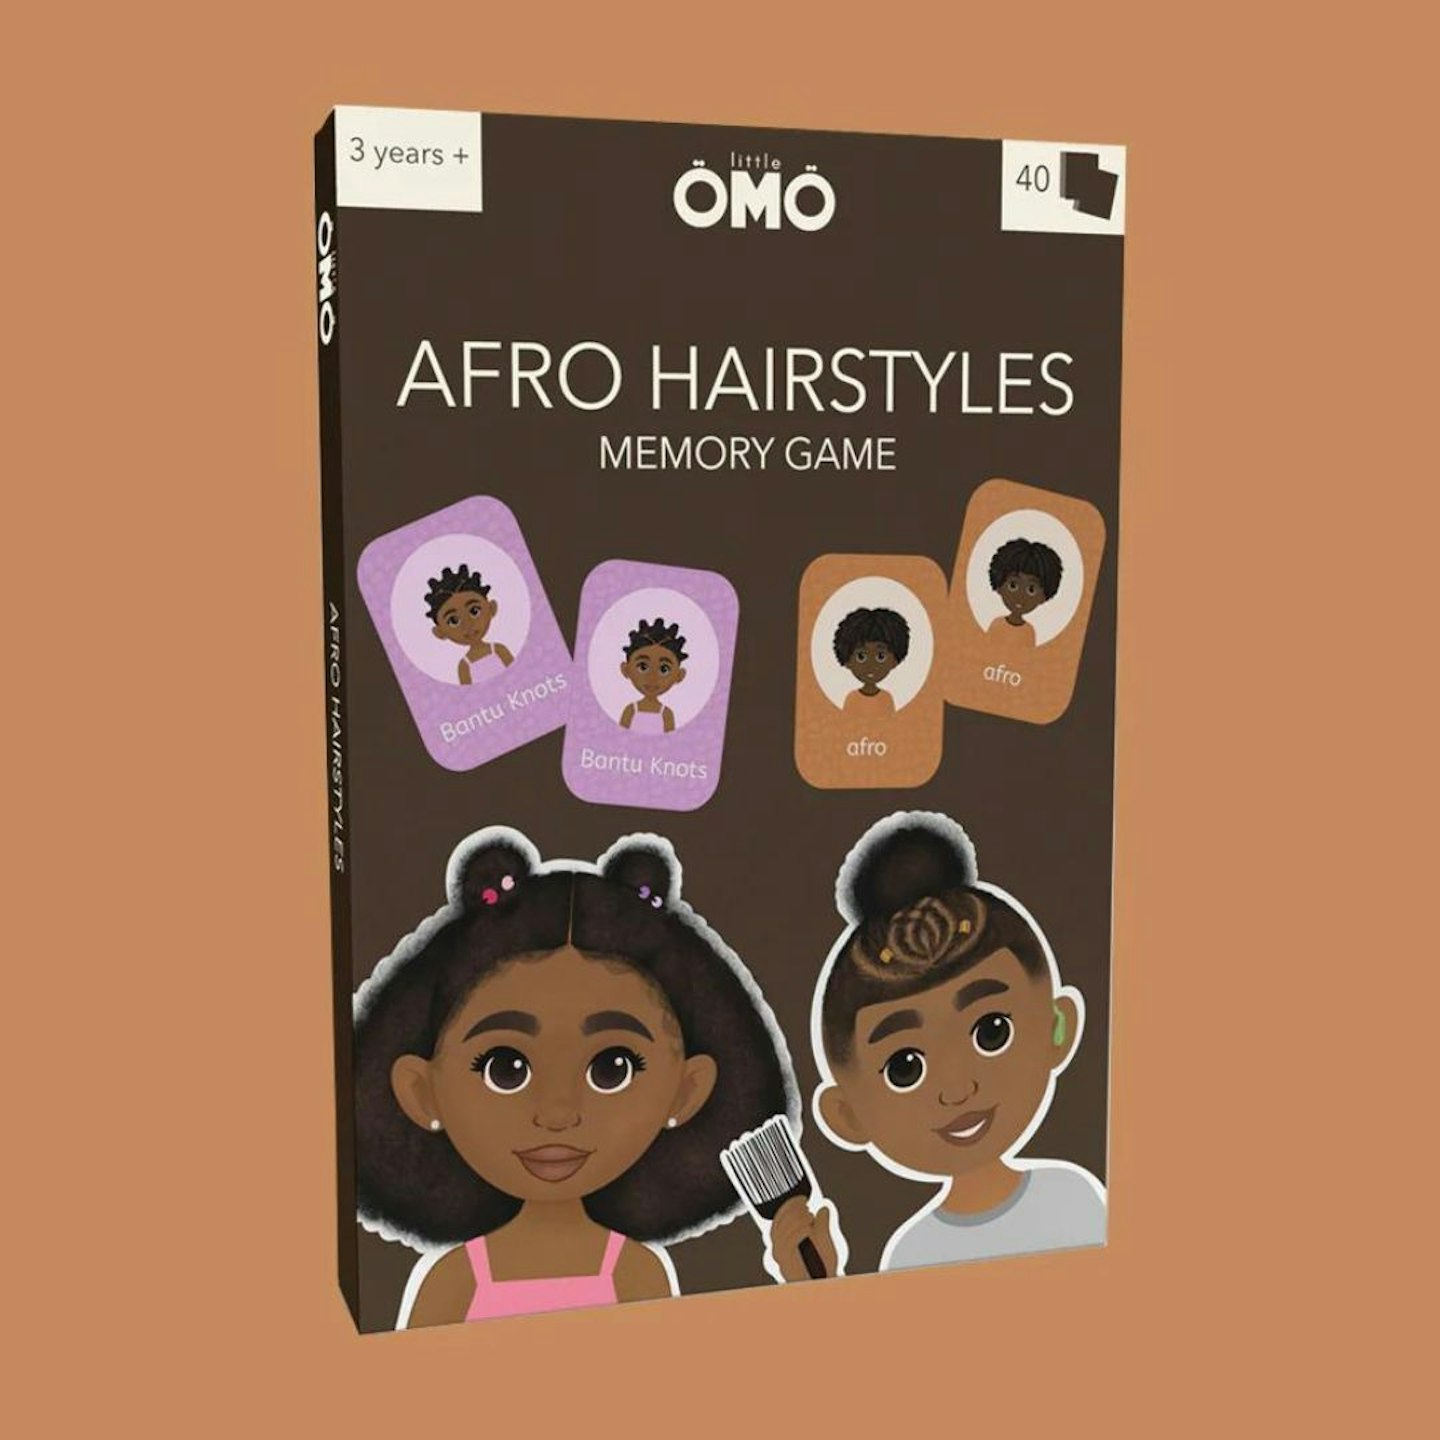  Best Christmas Gifts For Kids: Afro Hairstyles Memory Game